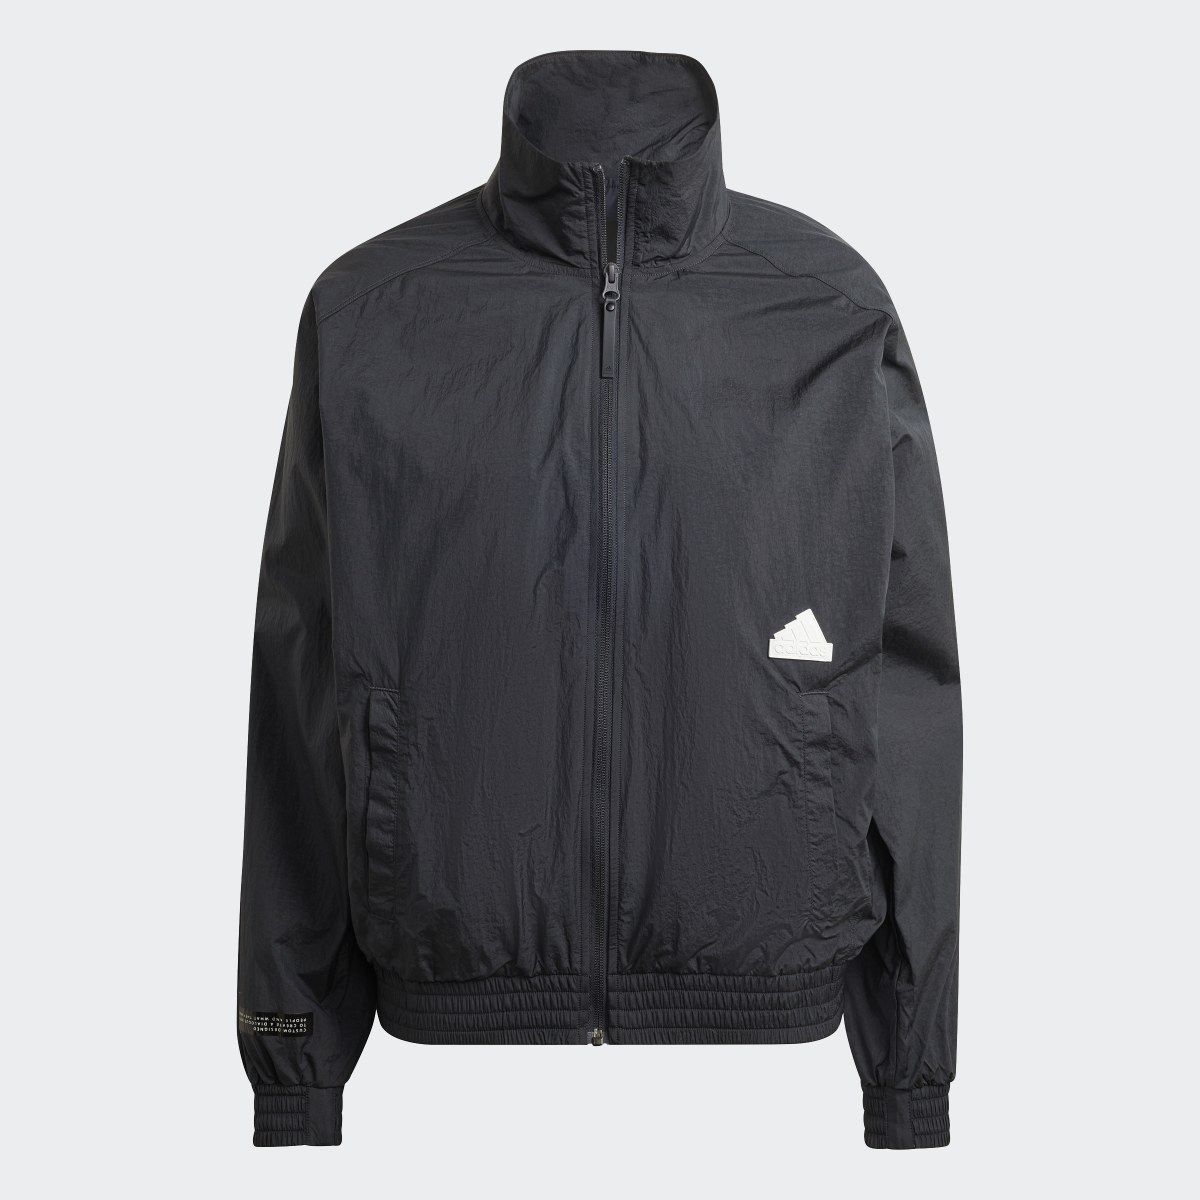 Adidas Woven Track Top. 6